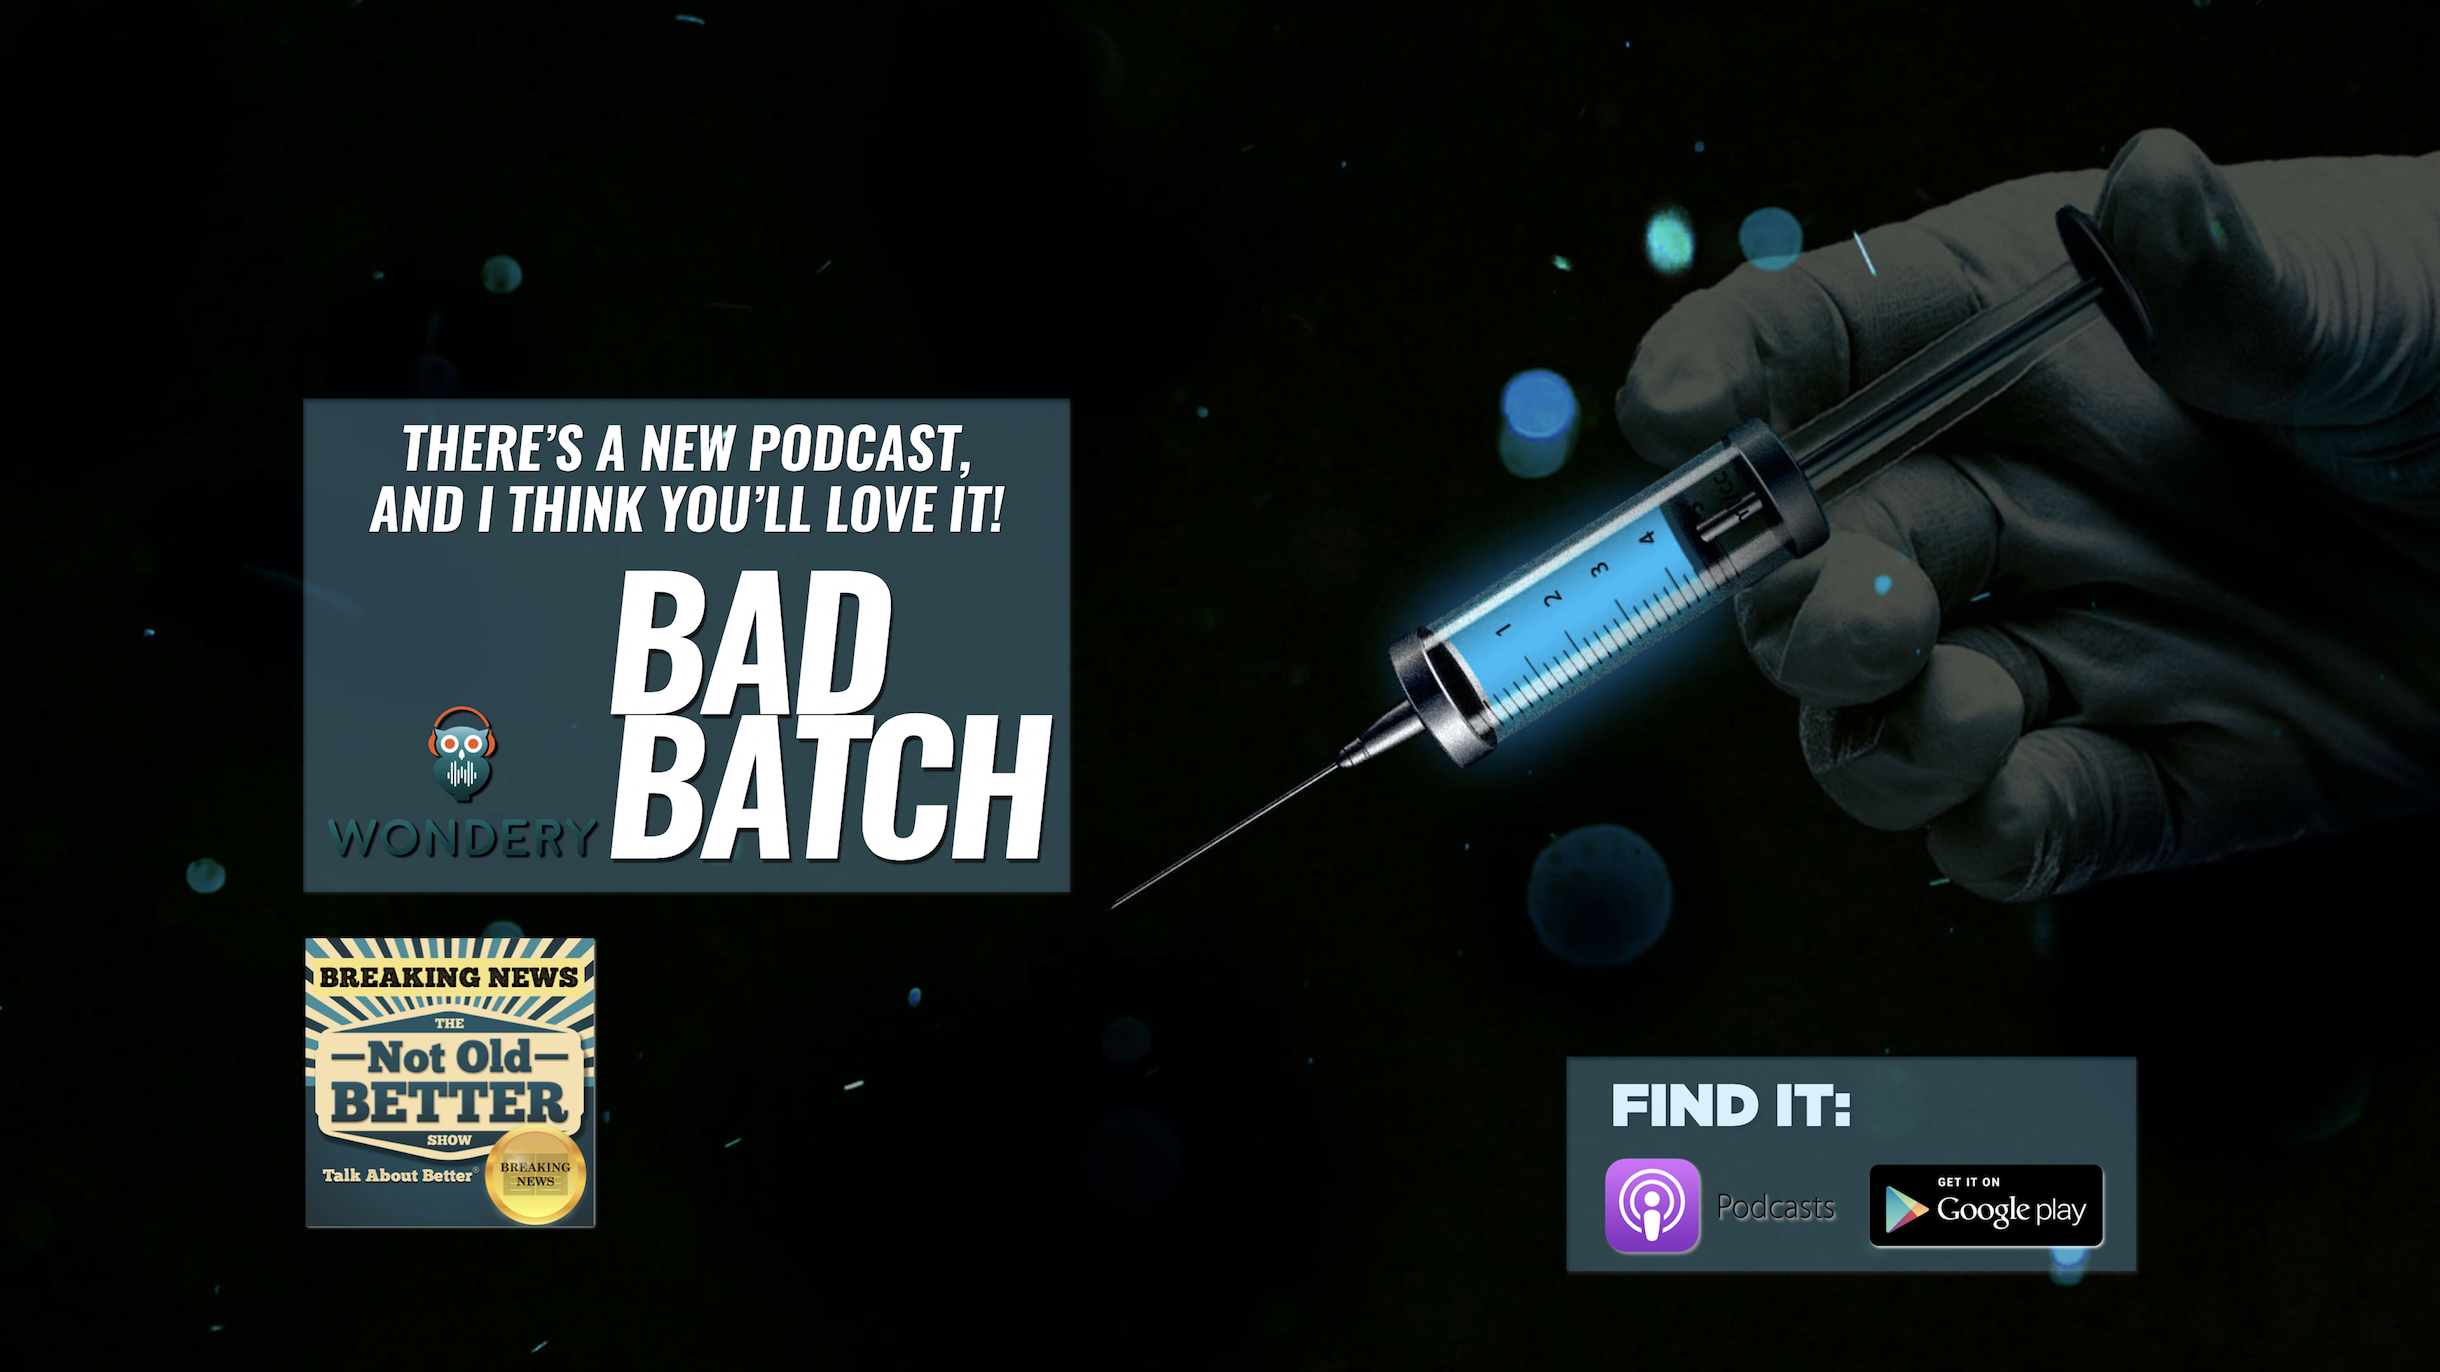 #400 Bad Batch – New From Wondery with Laura Beil (Dr. Death)